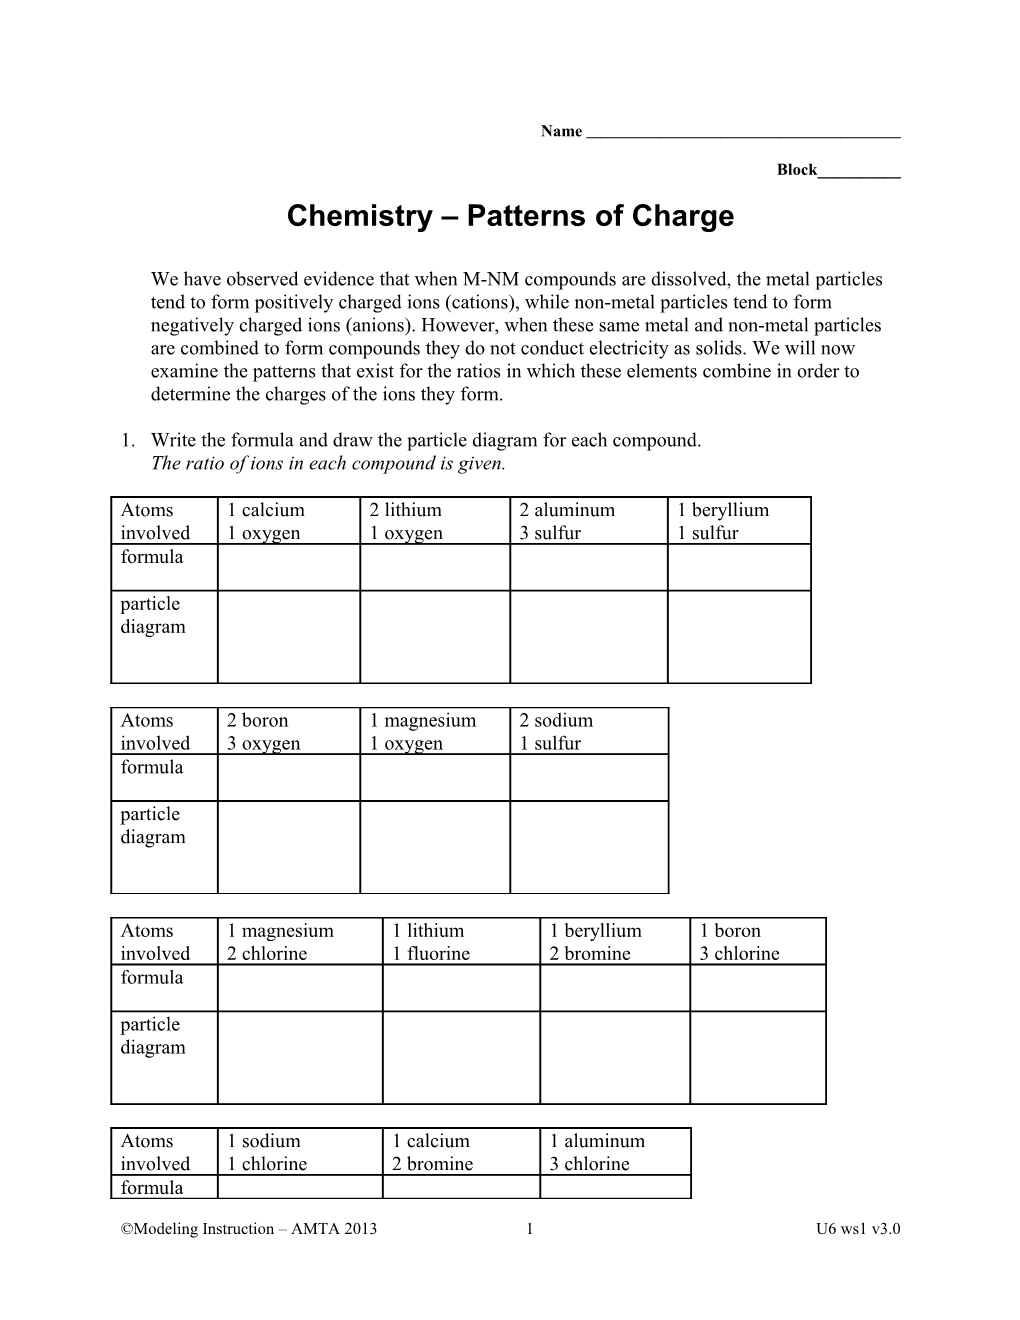 Chemistry Patterns of Charge